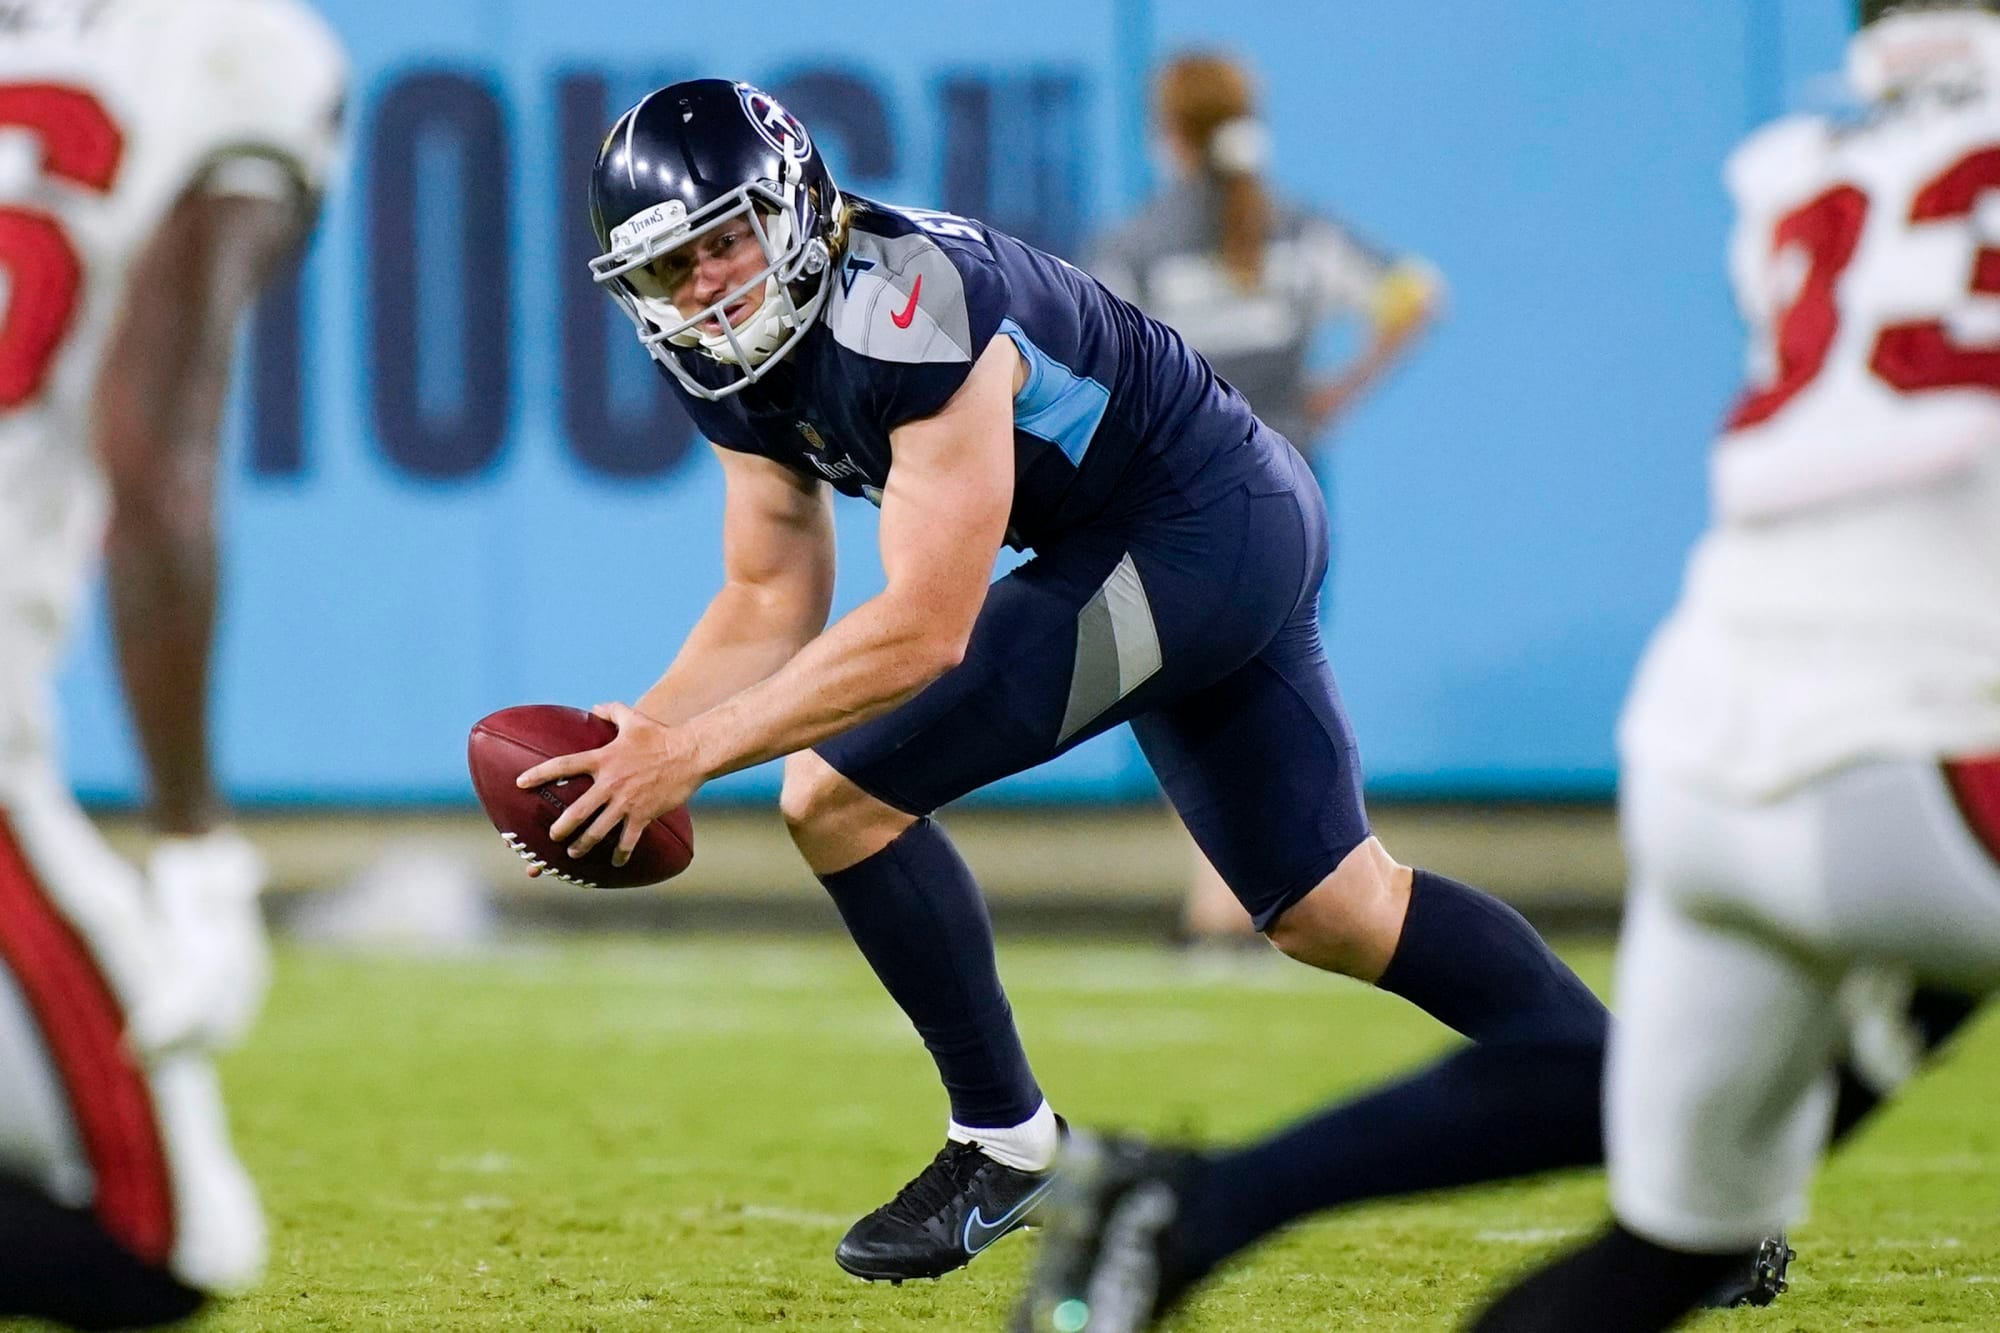 Tennessee Titans punter Ryan Stonehuse is taking the league by storm